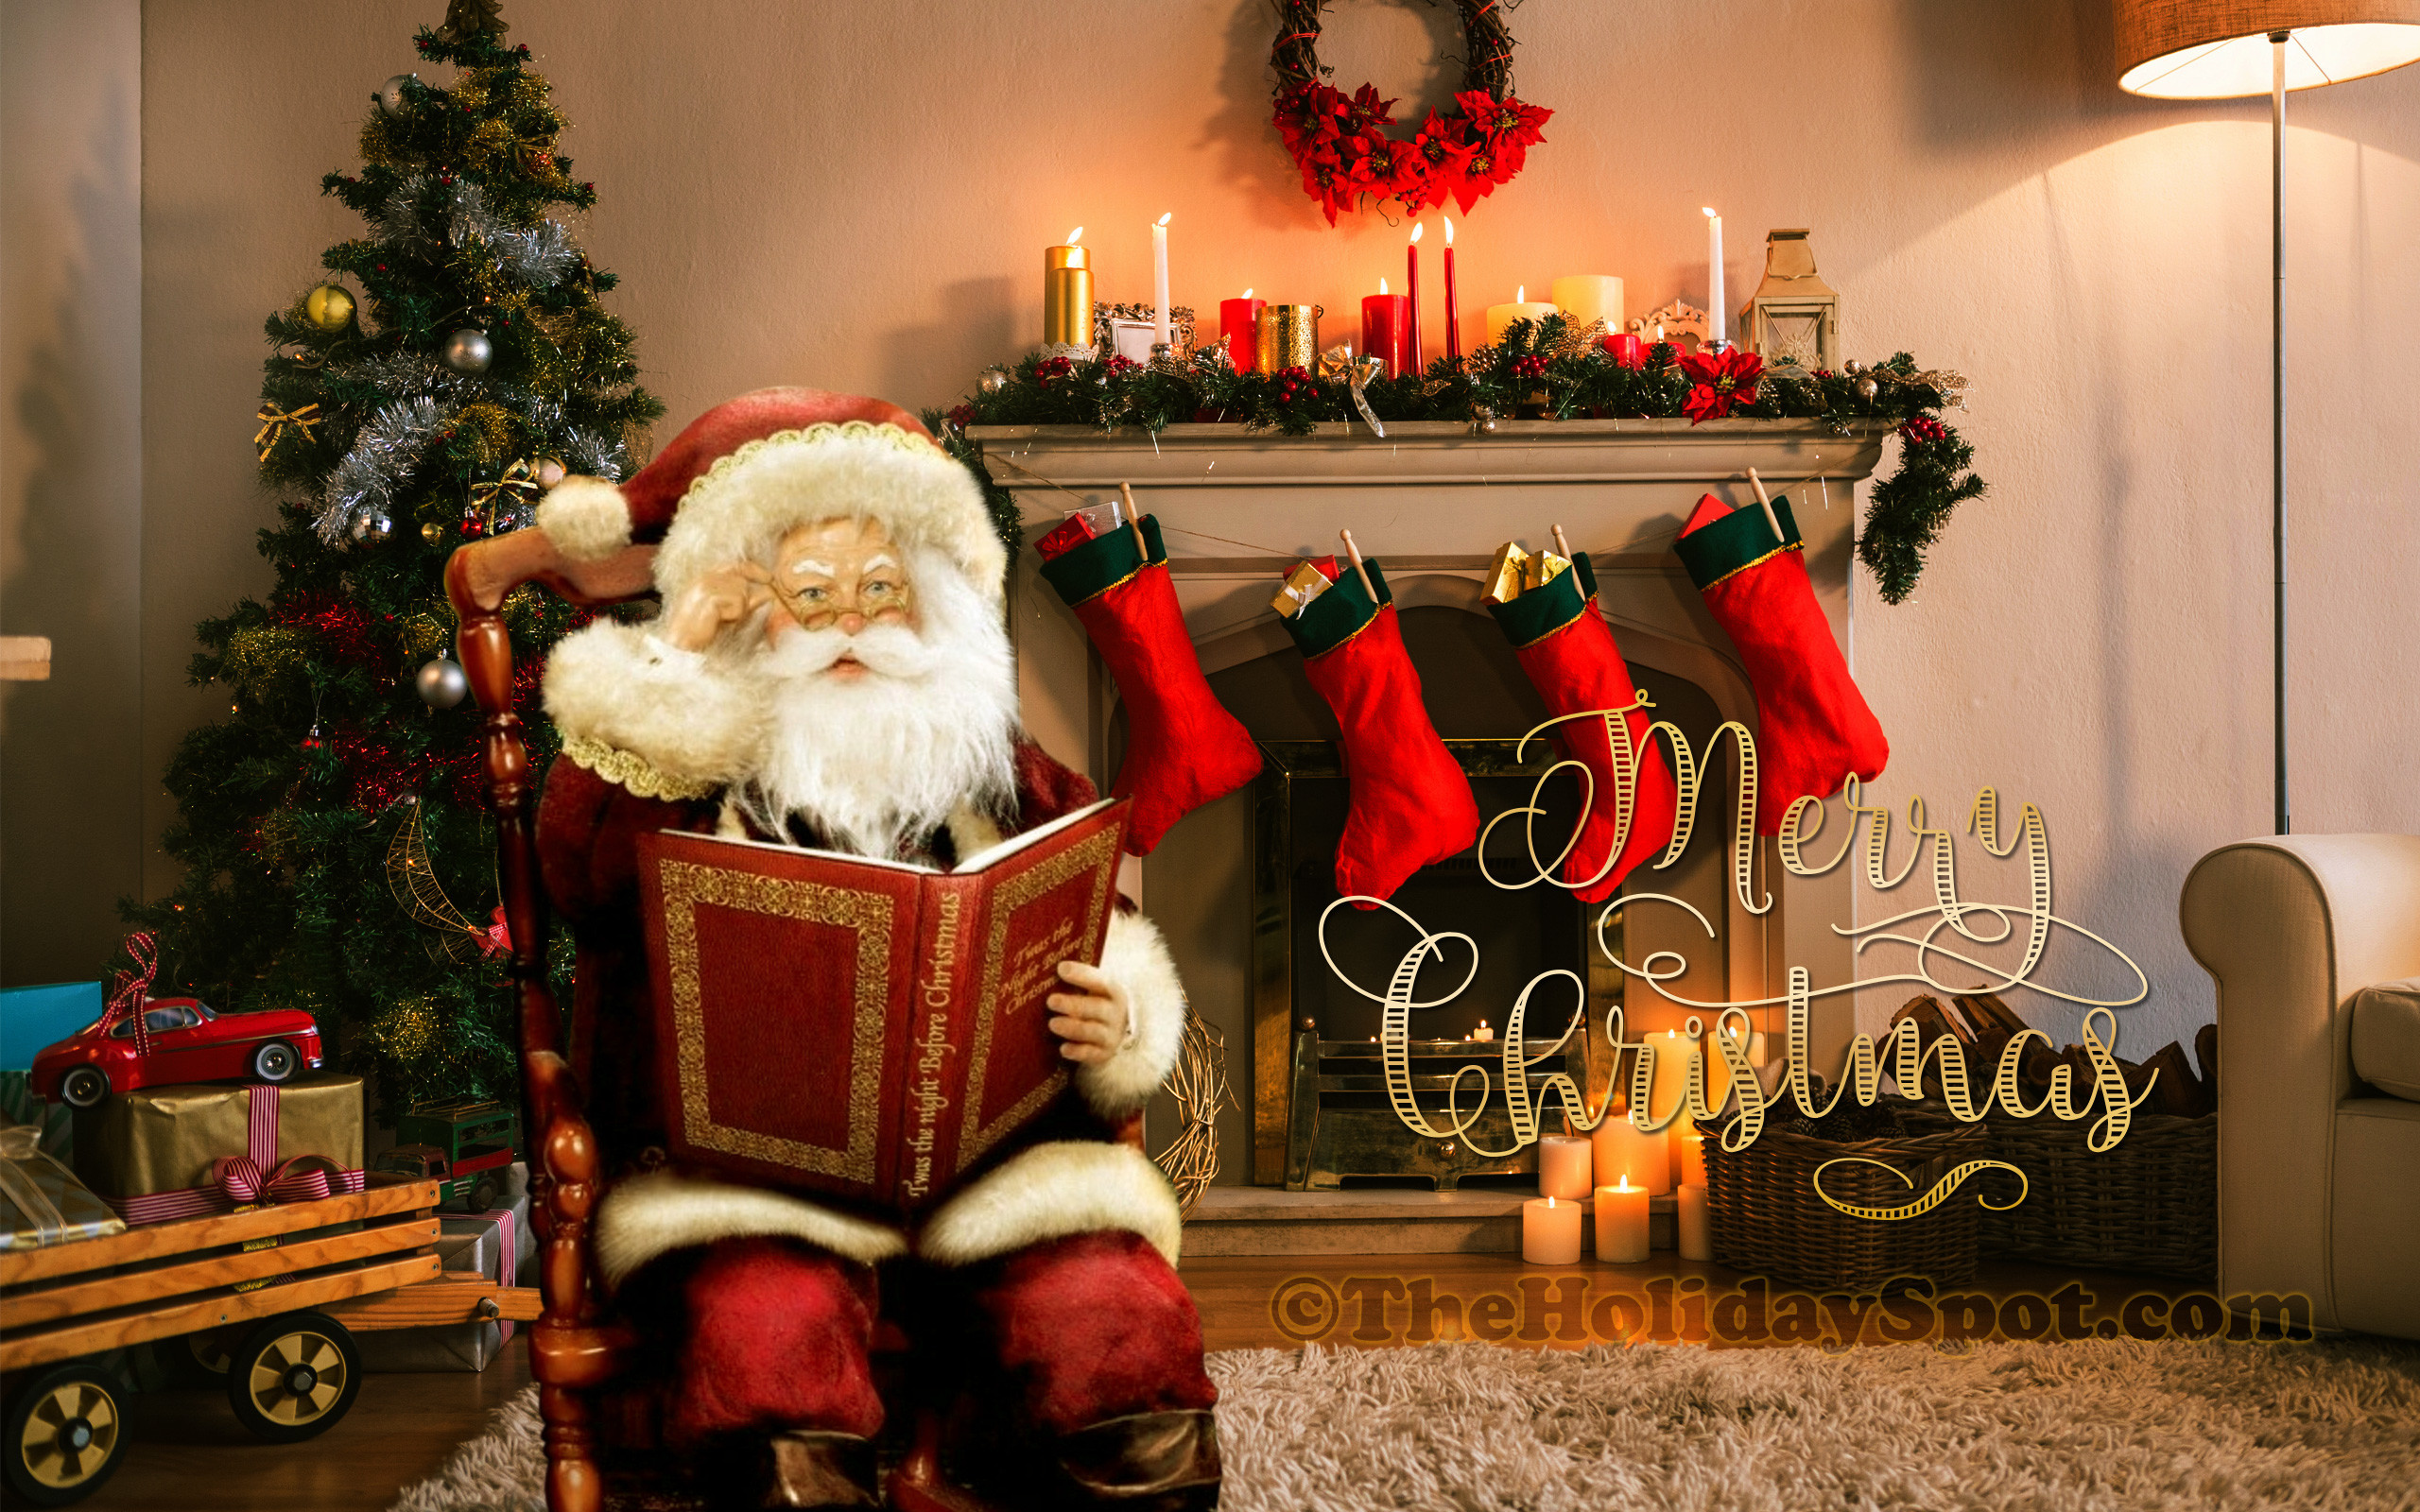 Wallpaper – Merry Christmas wishes from Santa